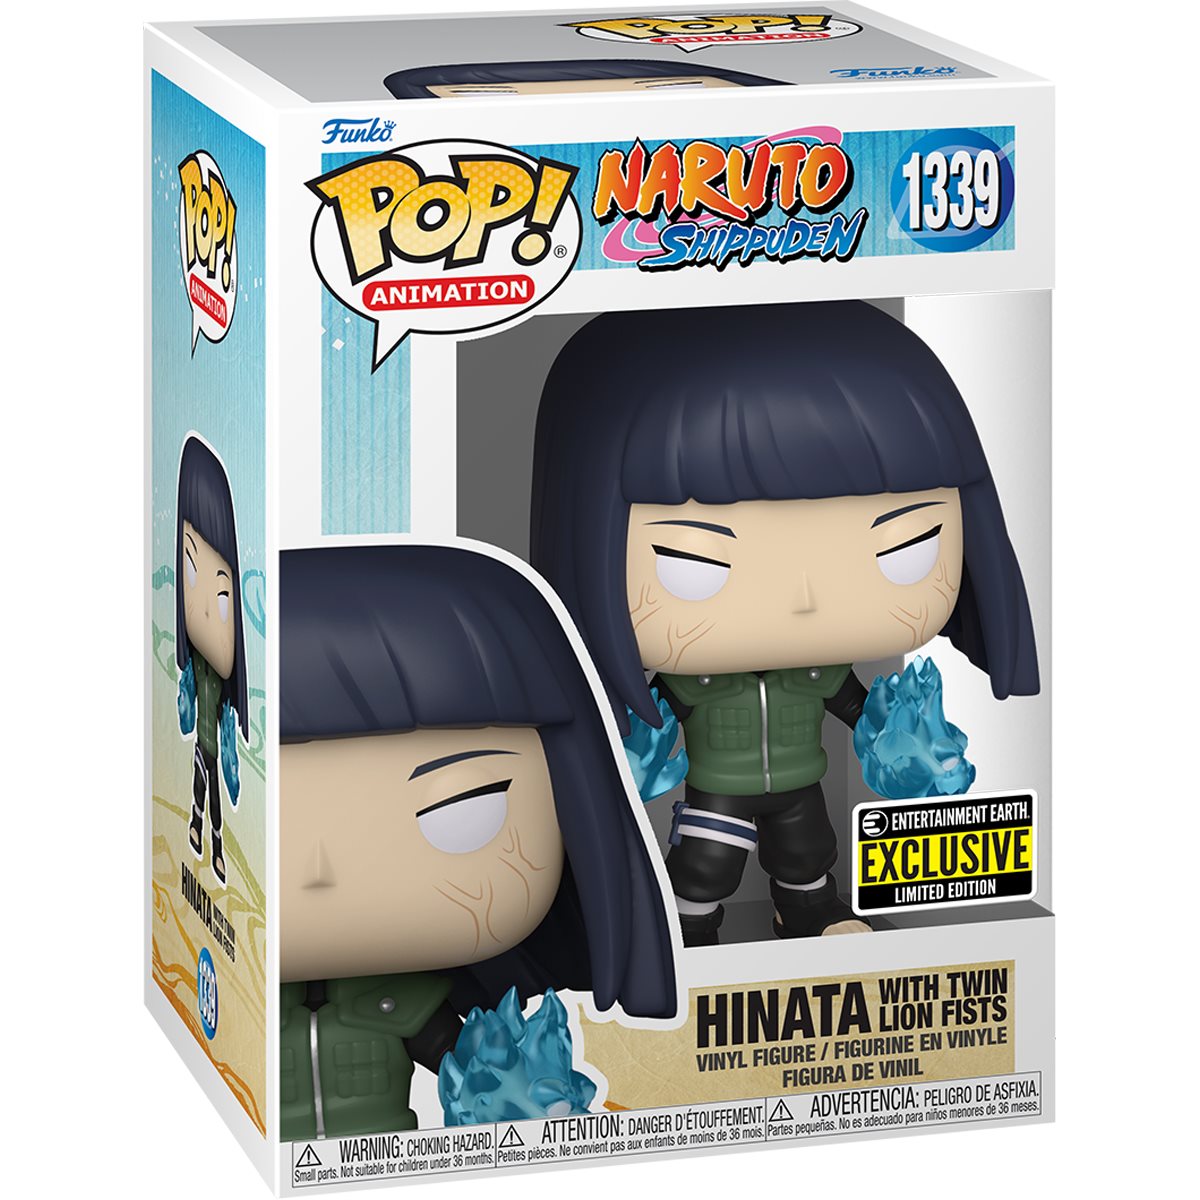 Hinata With Twin Lion Fists 1339 Common Funko Pop